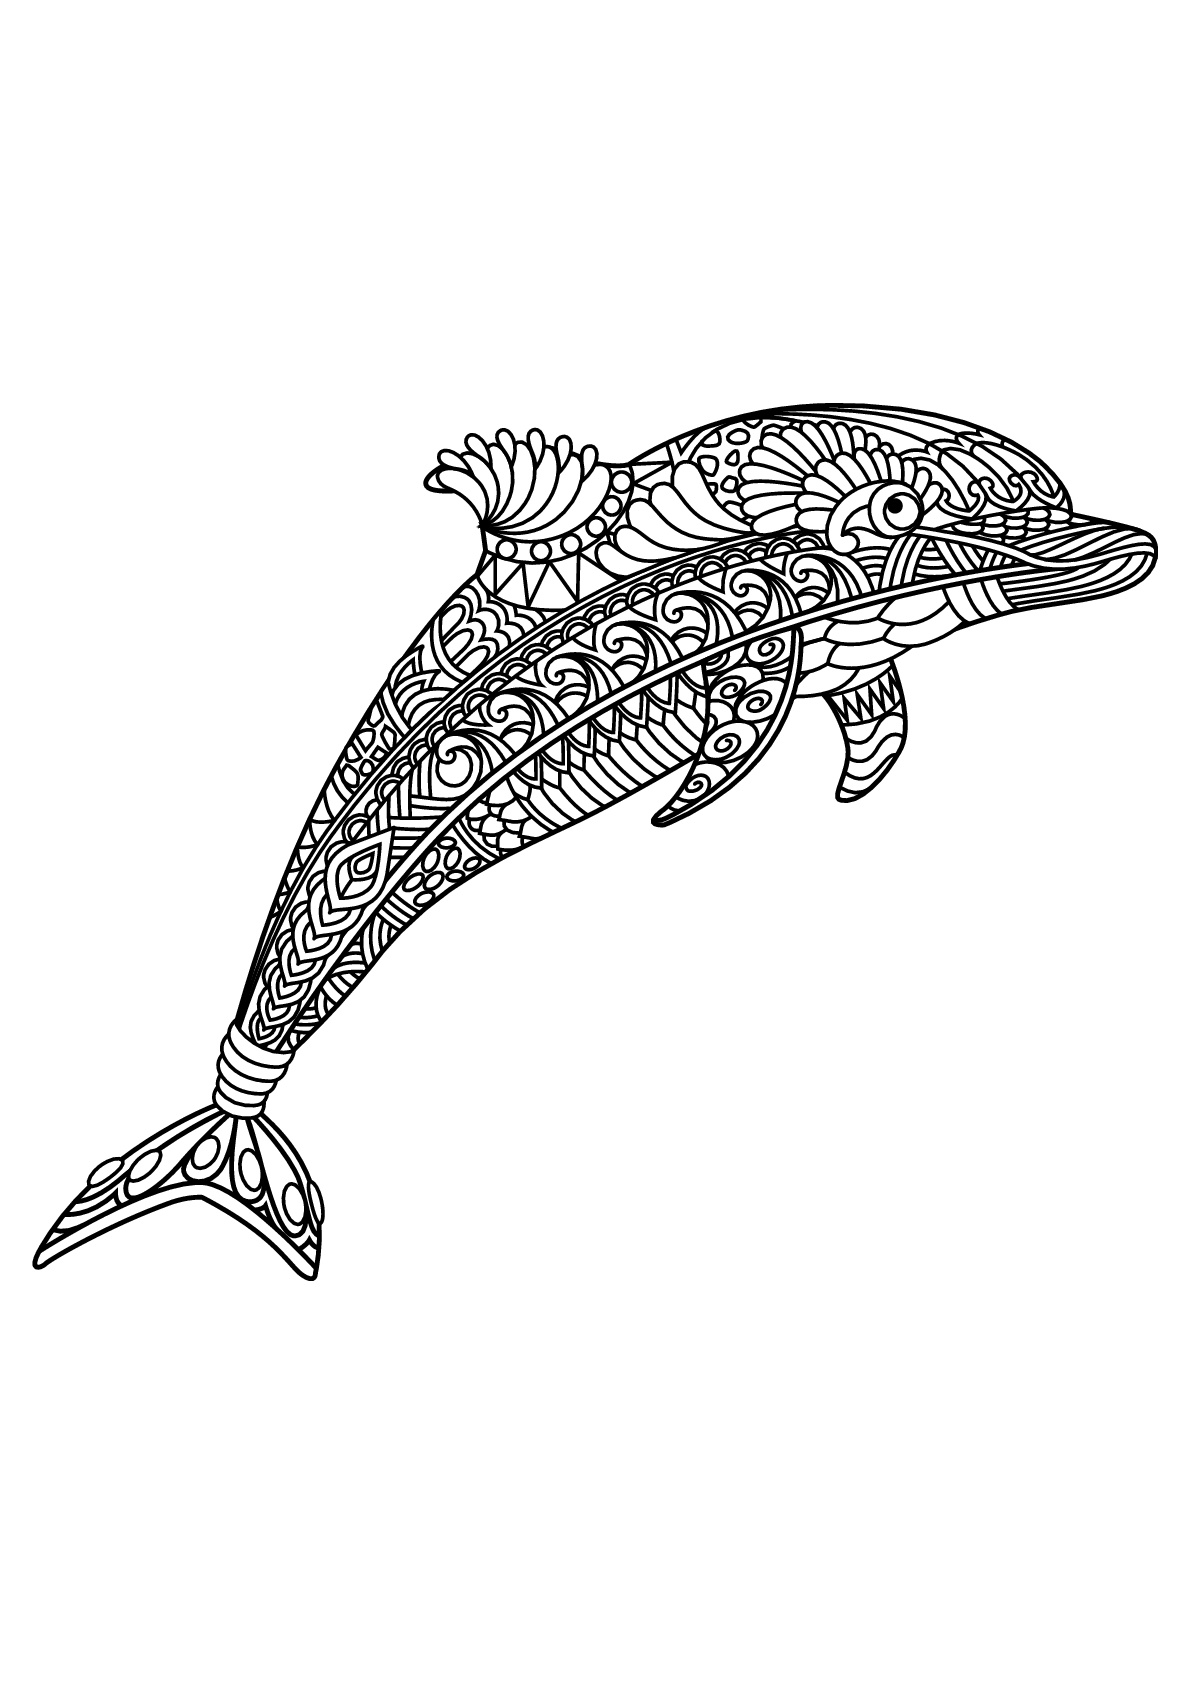 Free book dolphin - Dolphins Adult Coloring Pages